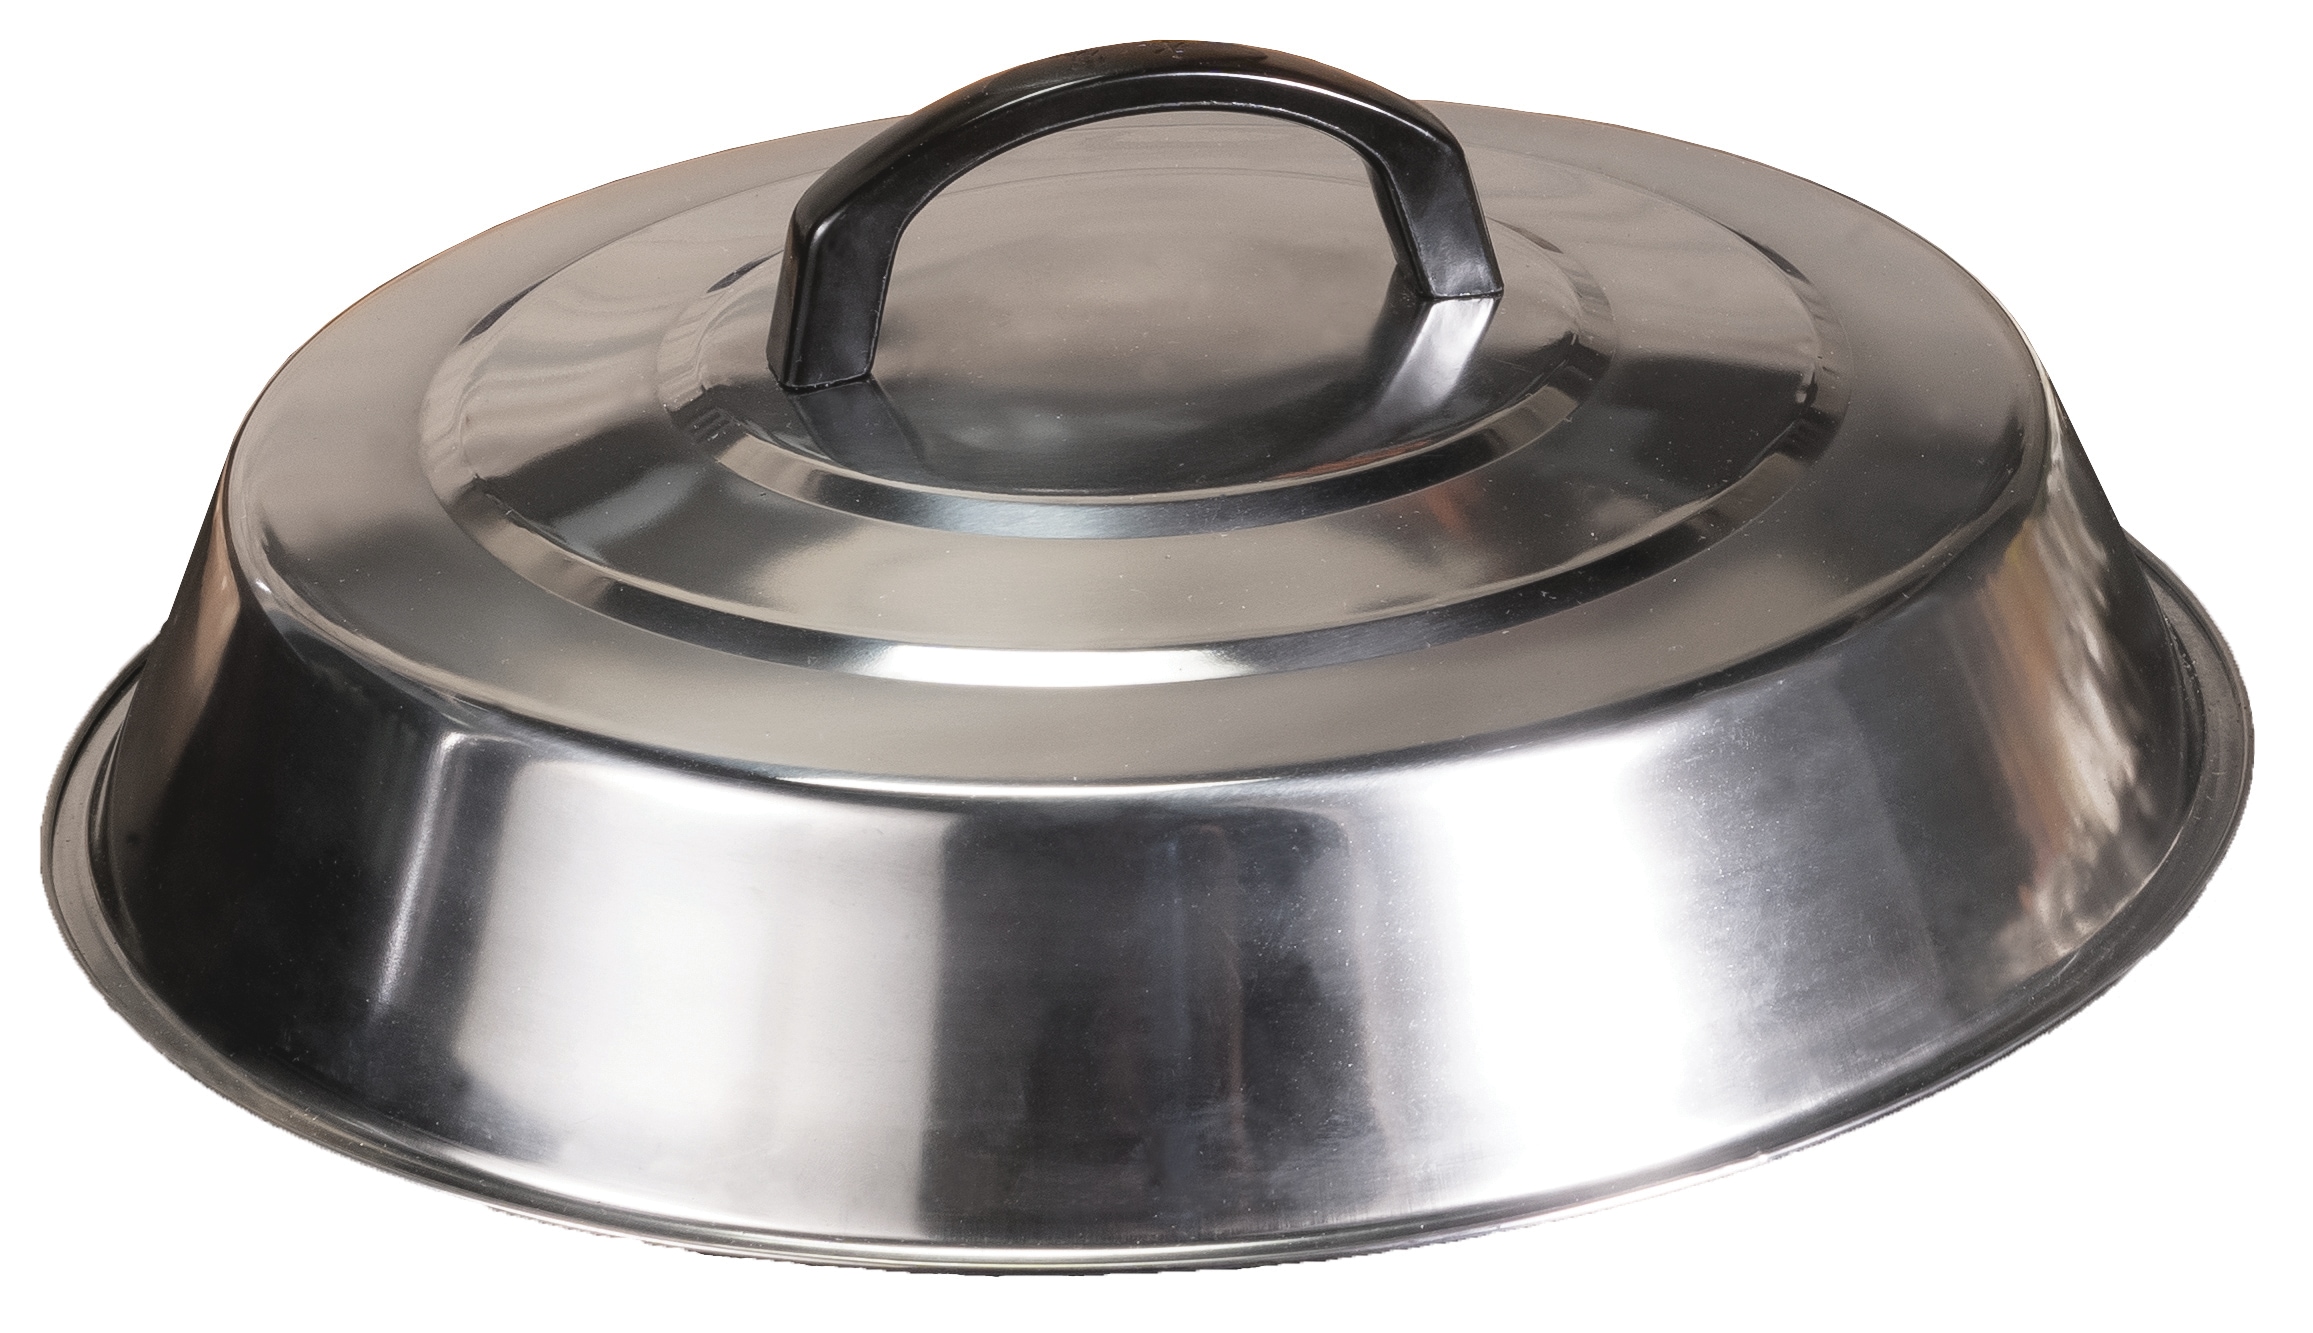  Blackstone 5555 Stainless Steel Square Basting Cover